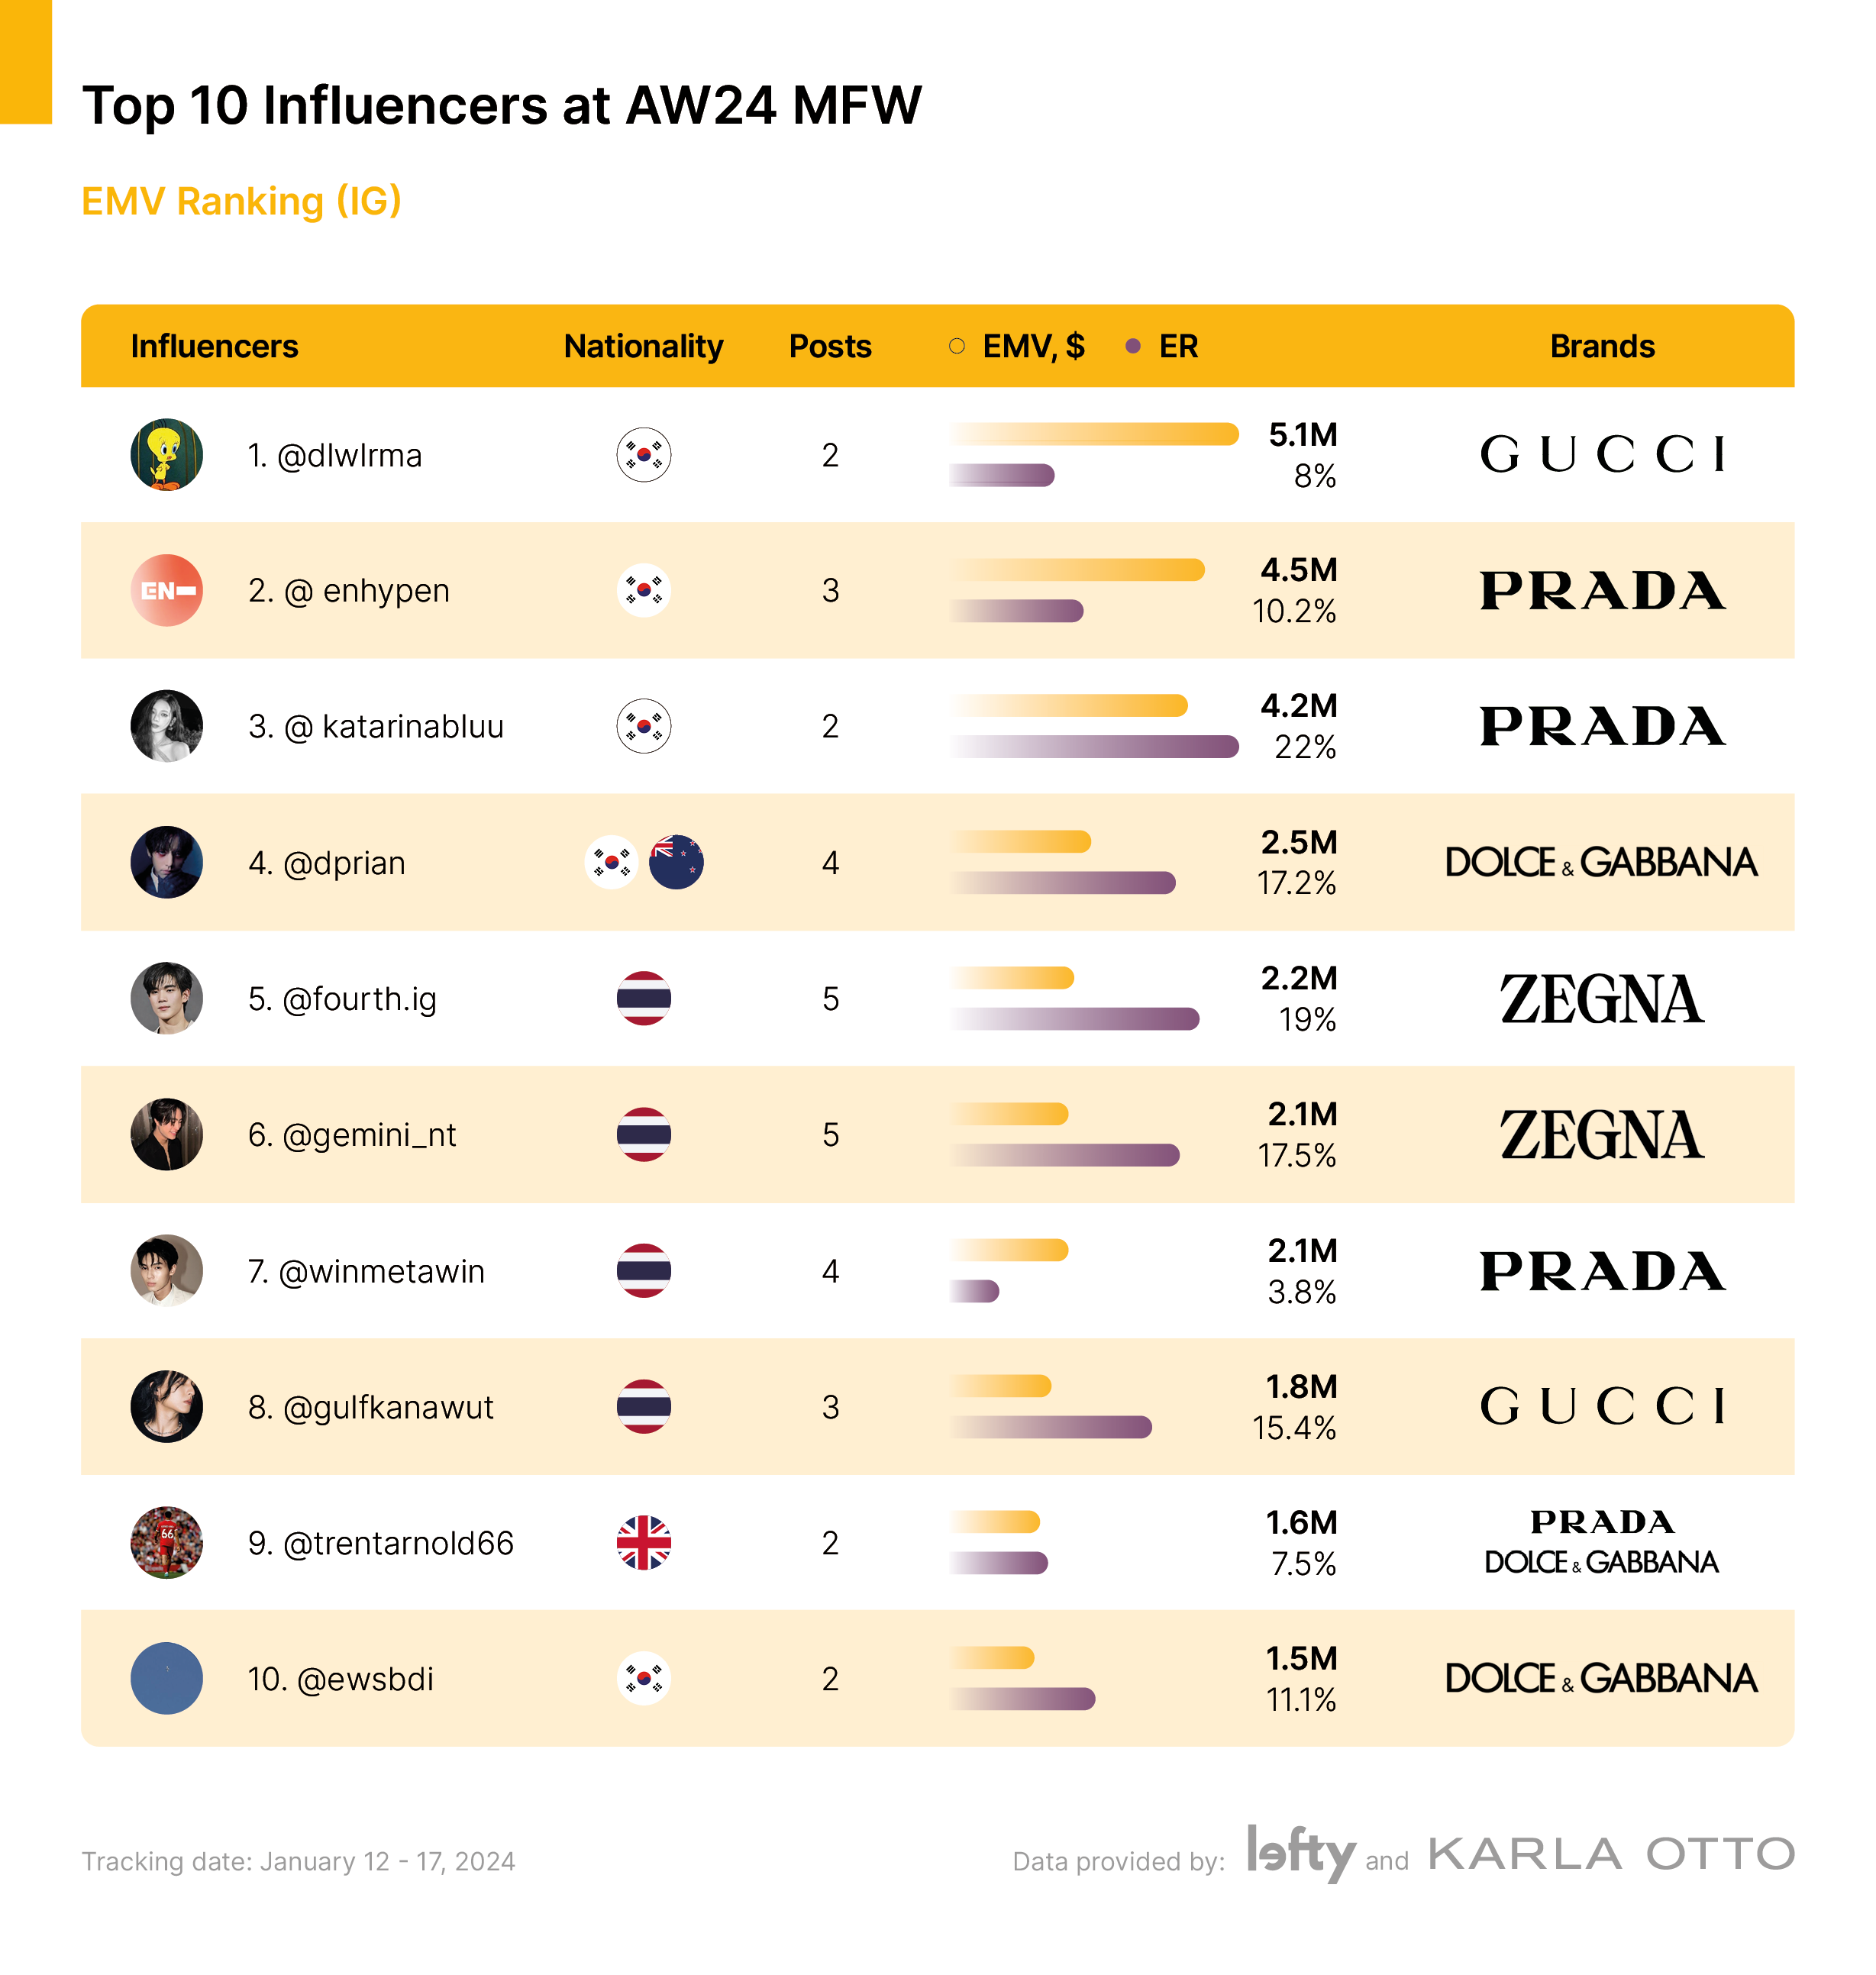 The top ten influencers and KOLs at MMFW, provided by Lefty.io